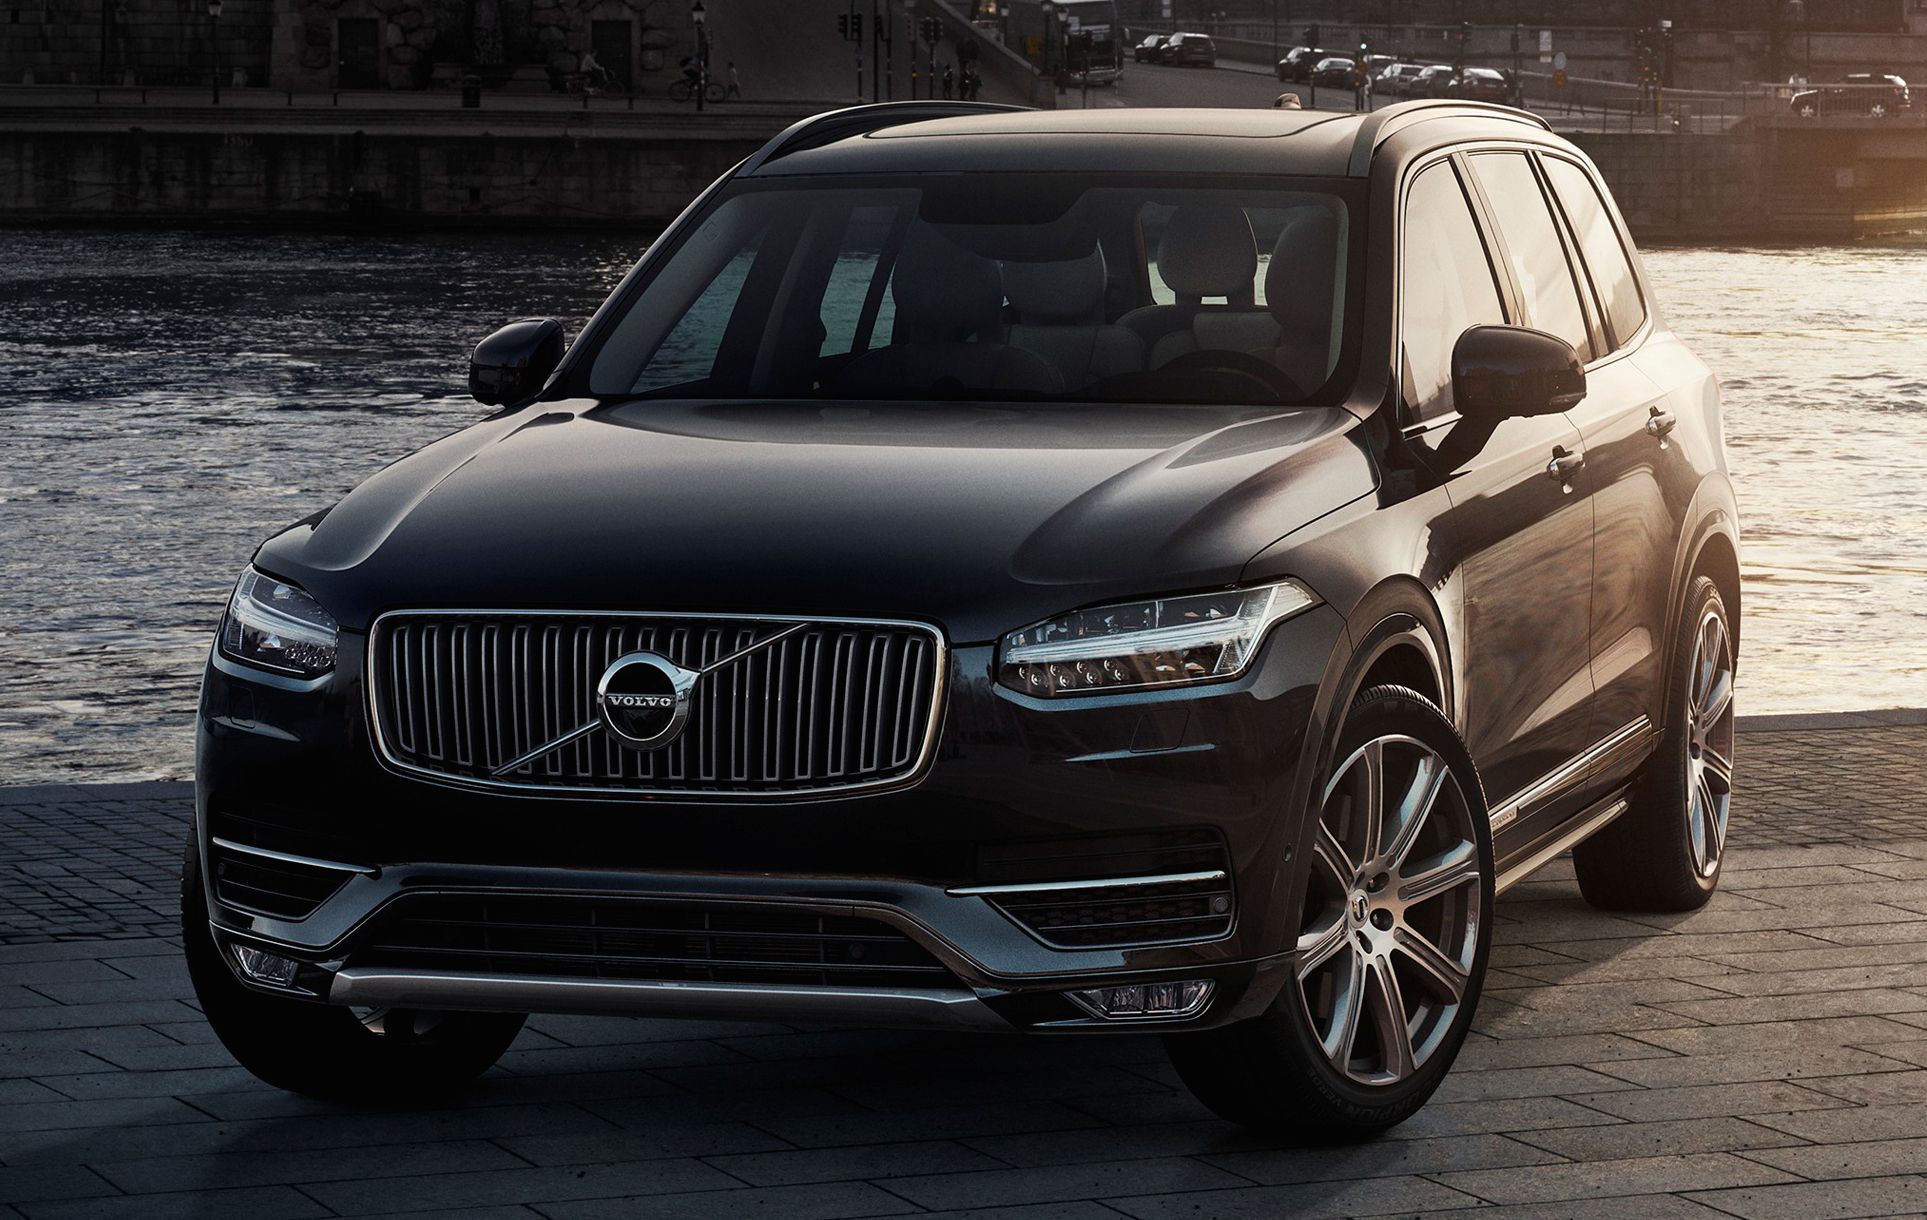 Volvo XC90 Wallpapers Images Photos Pictures Backgrounds